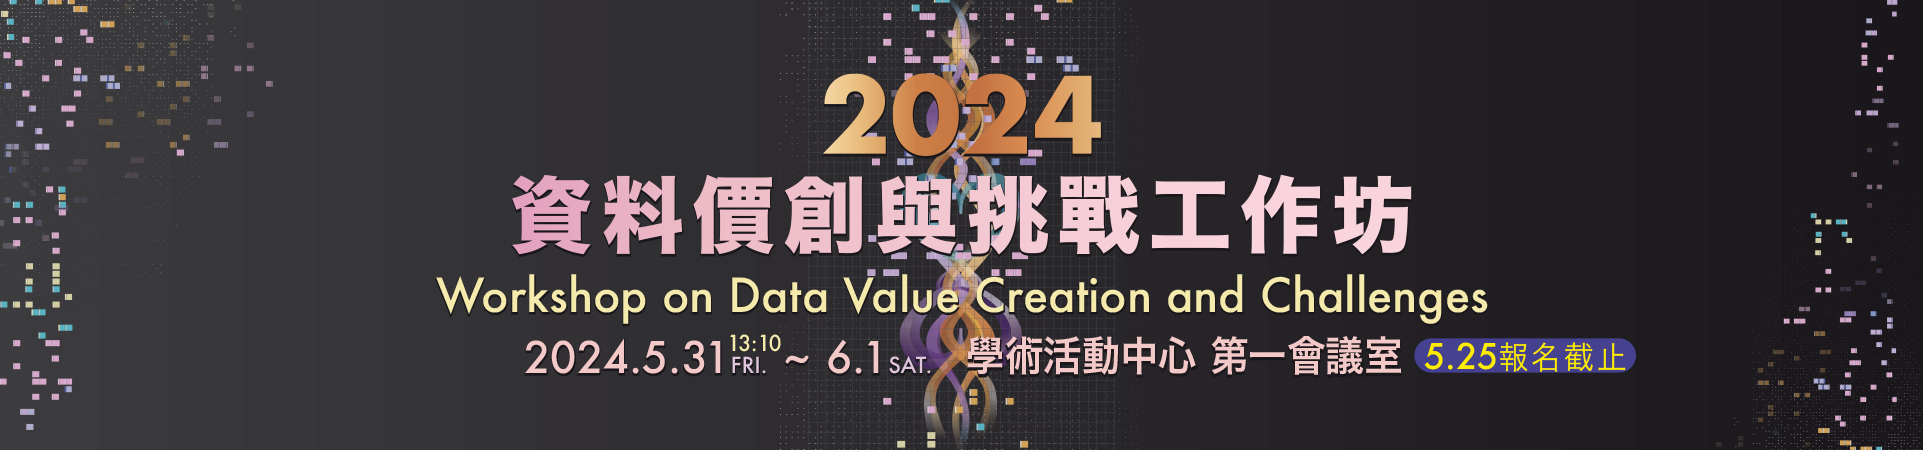 2024 Workshop on Data Value Creation and Challenges